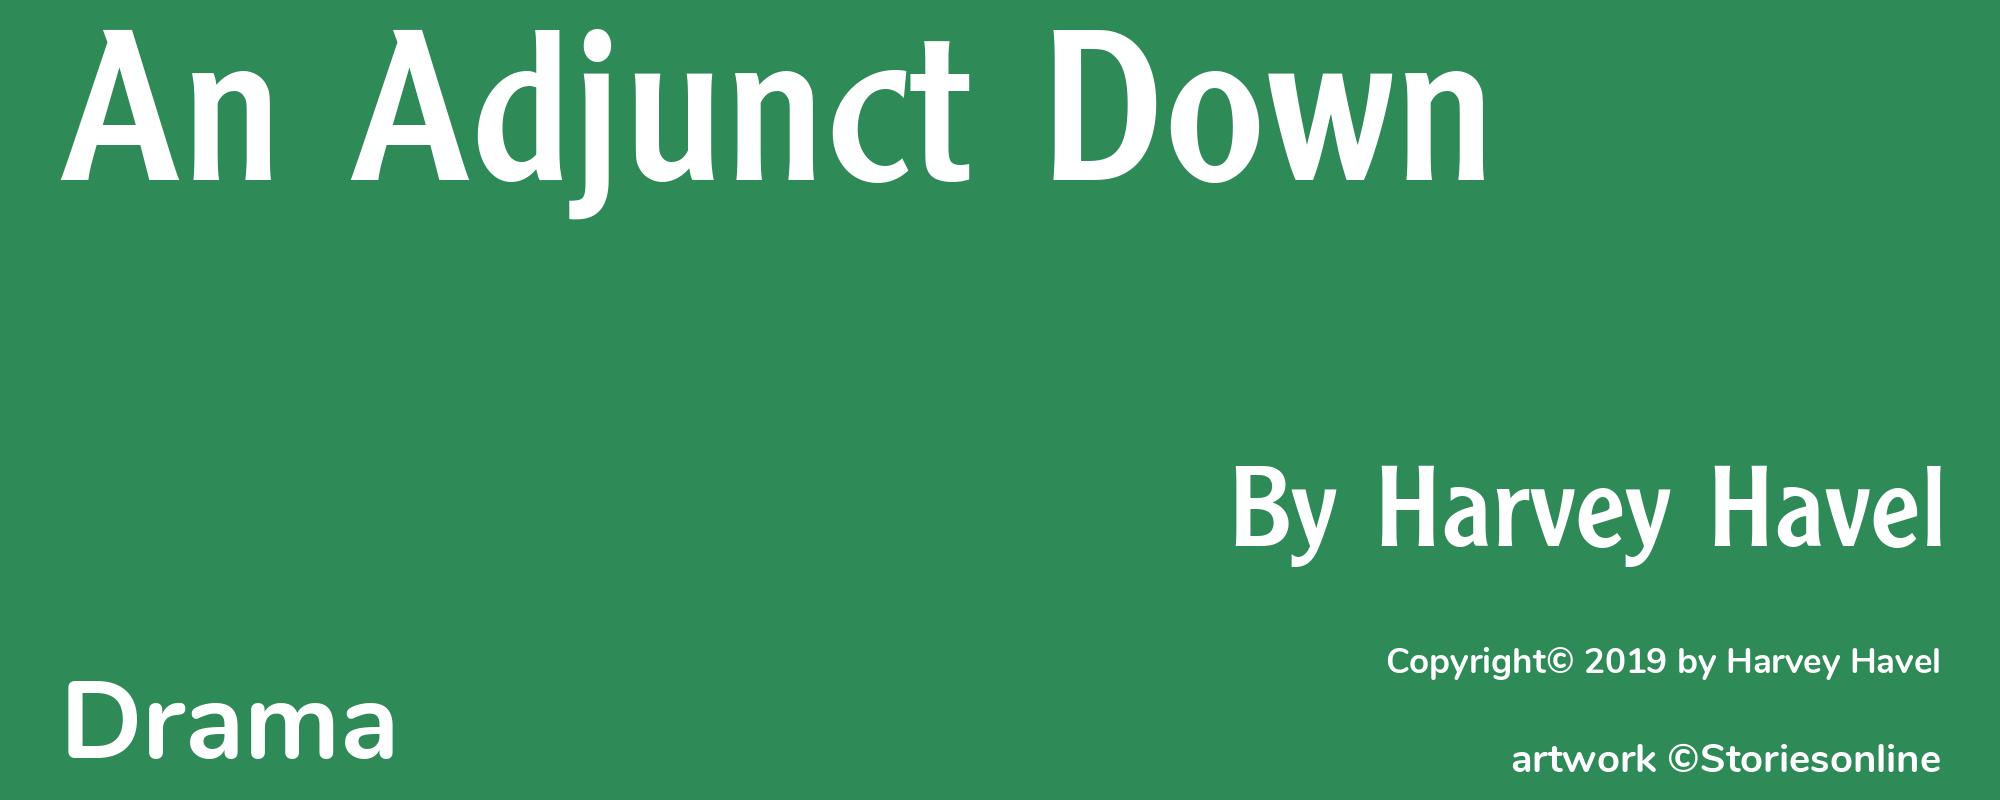 An Adjunct Down - Cover